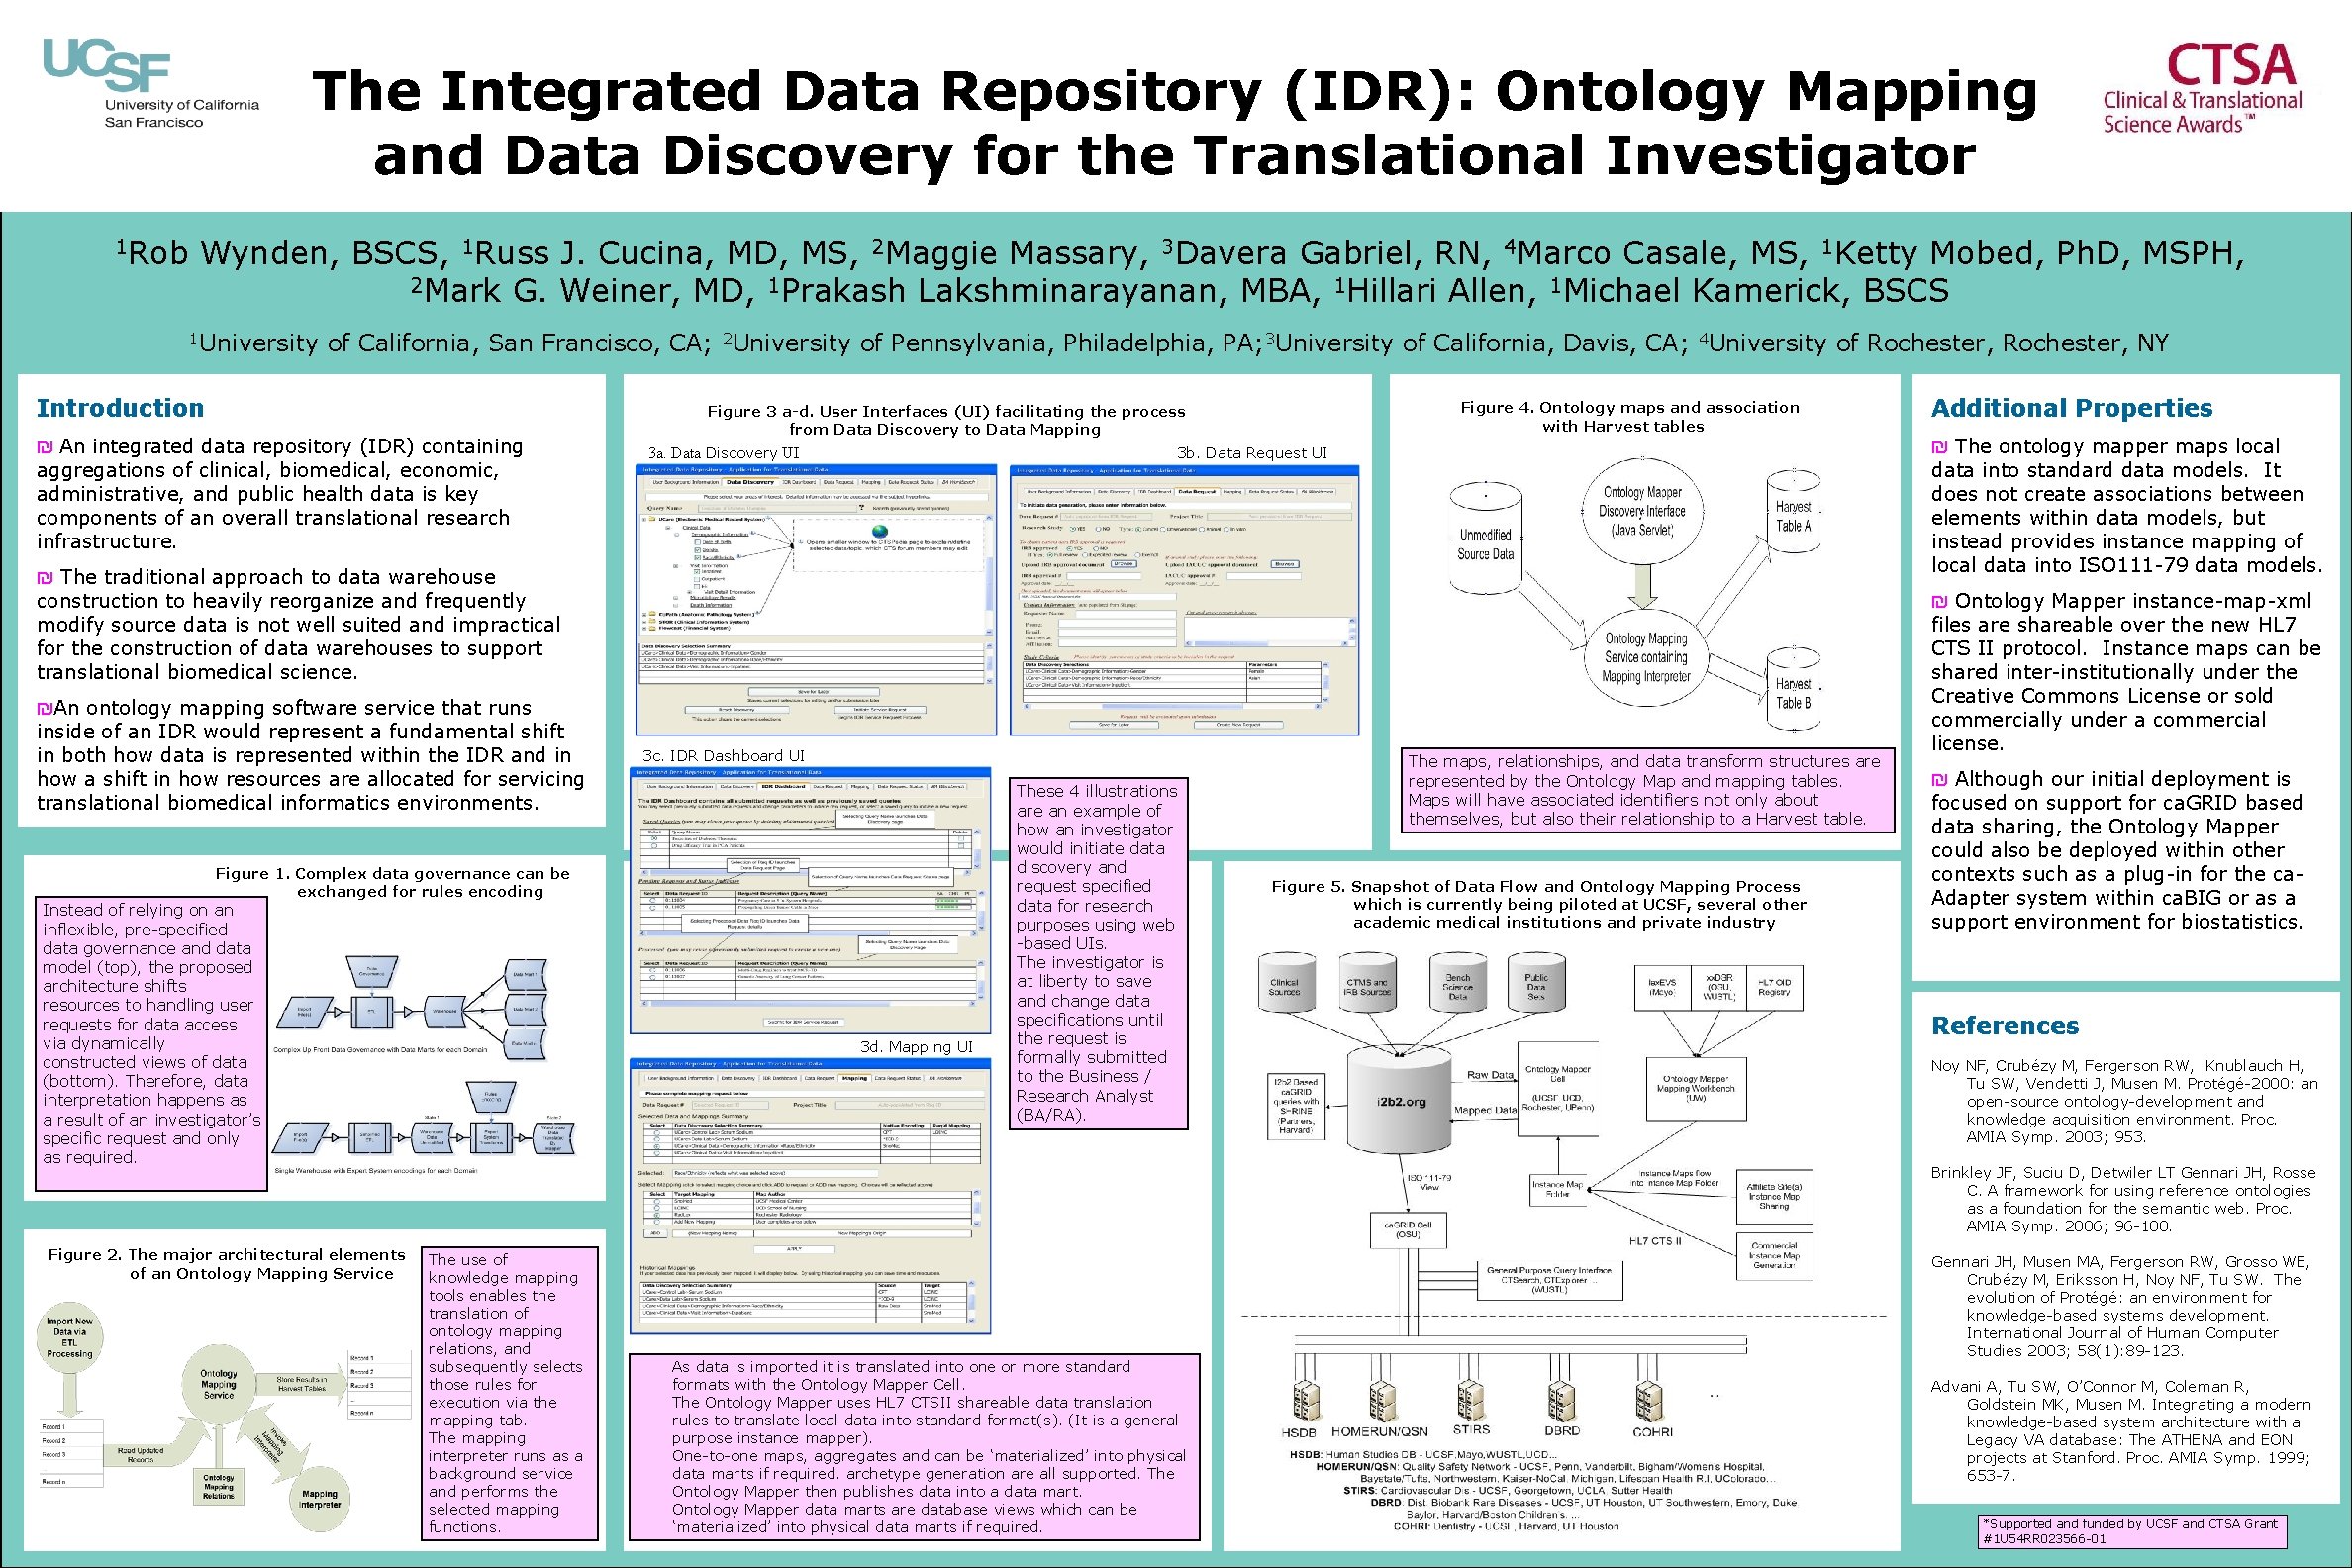 The Integrated Data Repository (IDR): Ontology Mapping and Data Discovery for the Translational Investigator